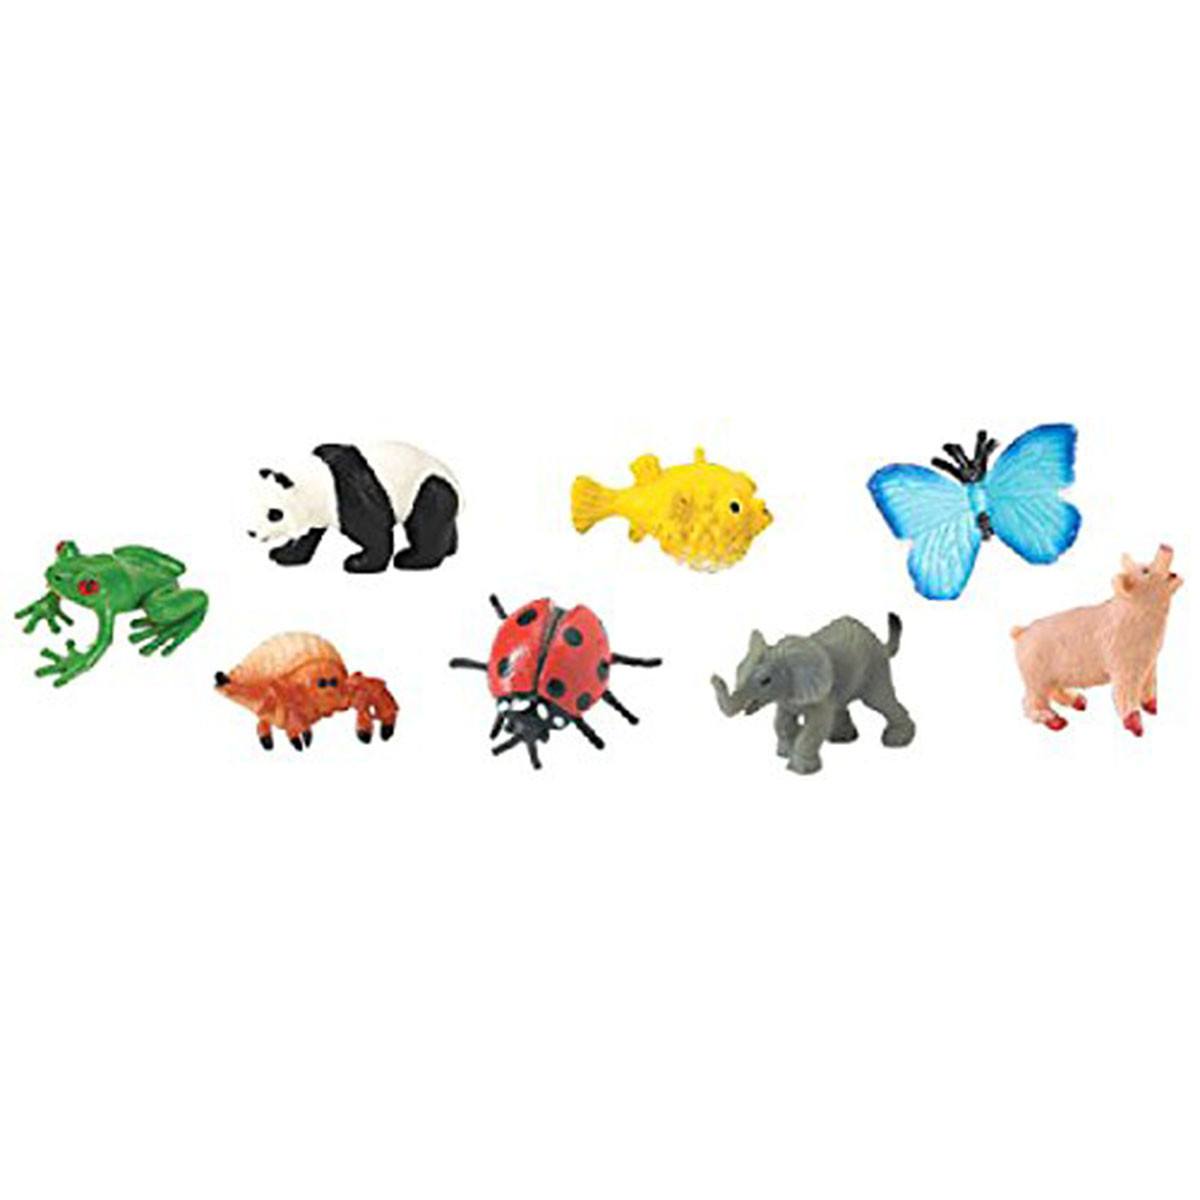 animal toy pack